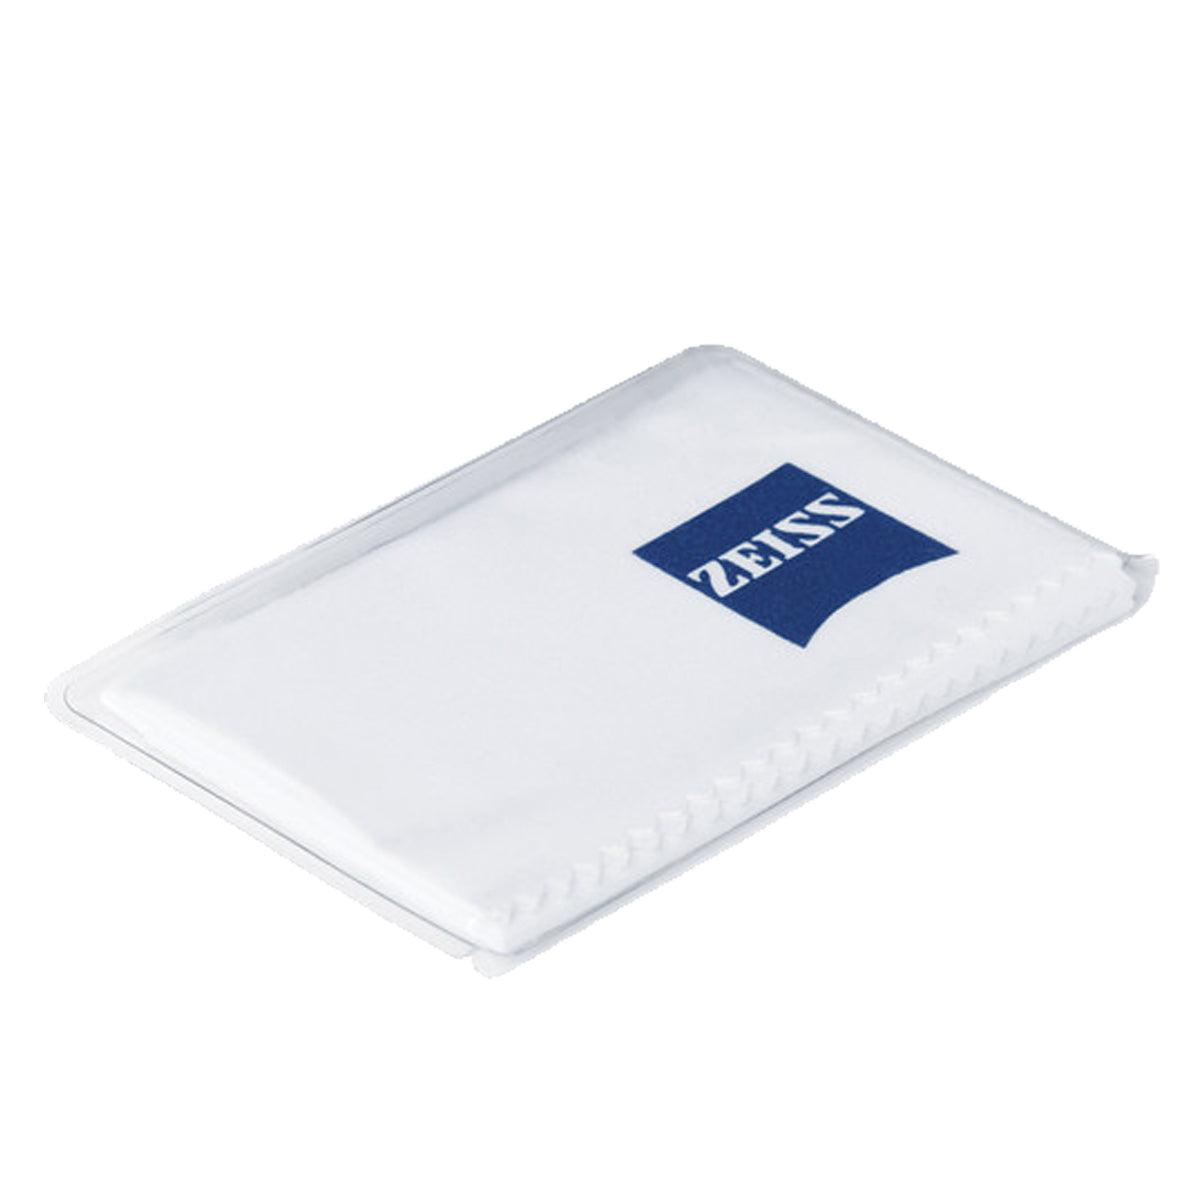 Zeiss Jumbo Microfiber Cleaning Cloth in  by GOHUNT | Zeiss - GOHUNT Shop